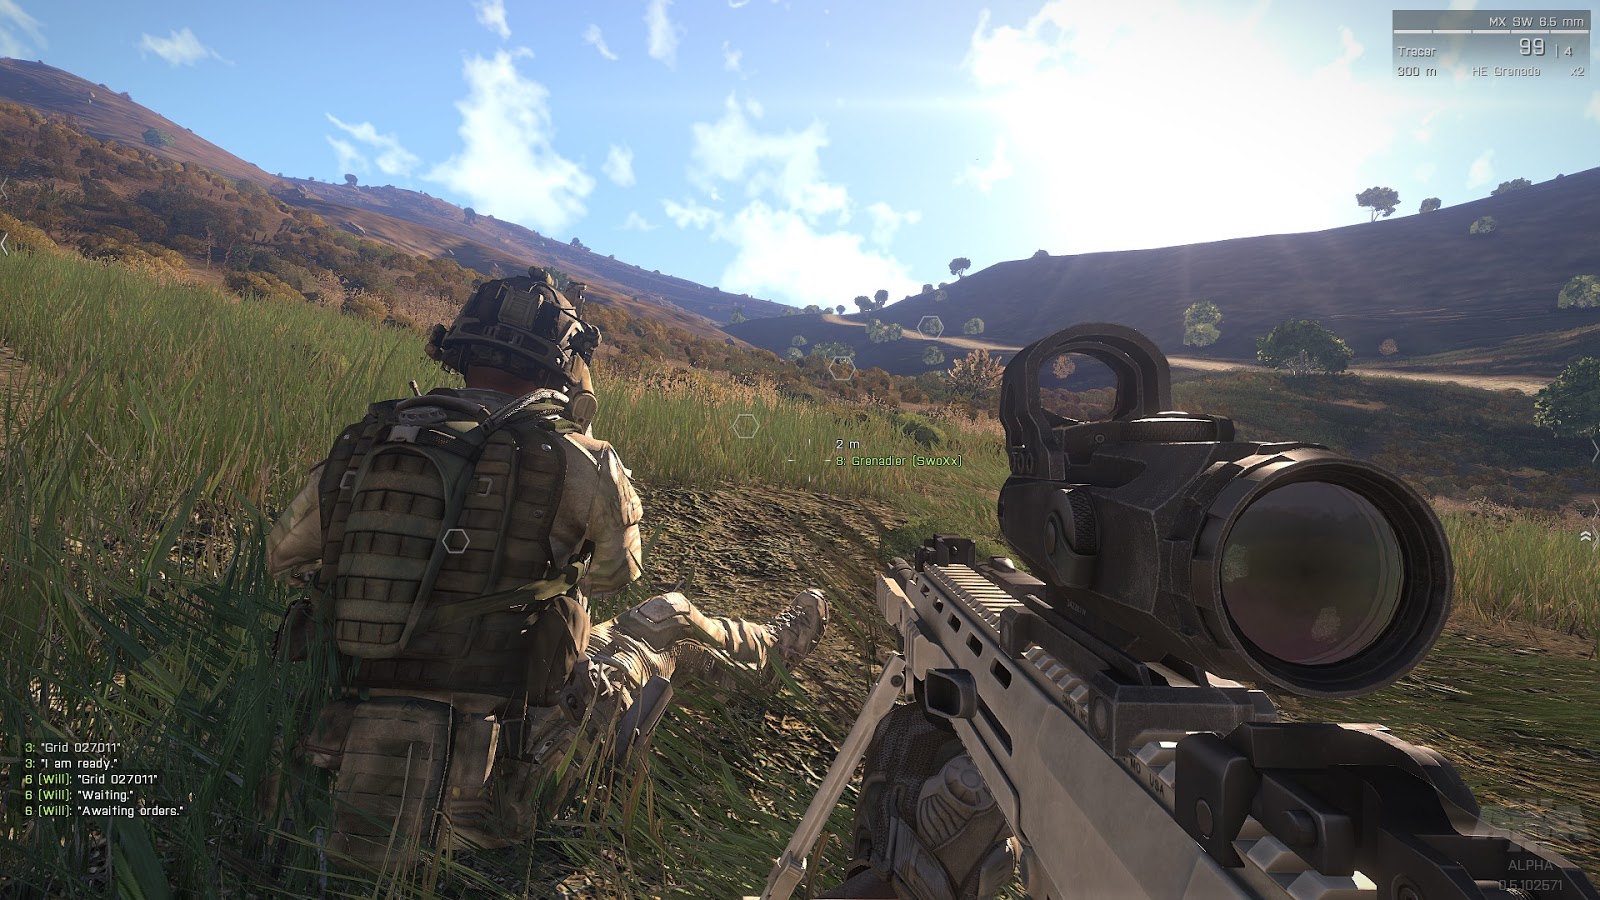 Arma III, a PC only game has beautiful graphics. : gaming